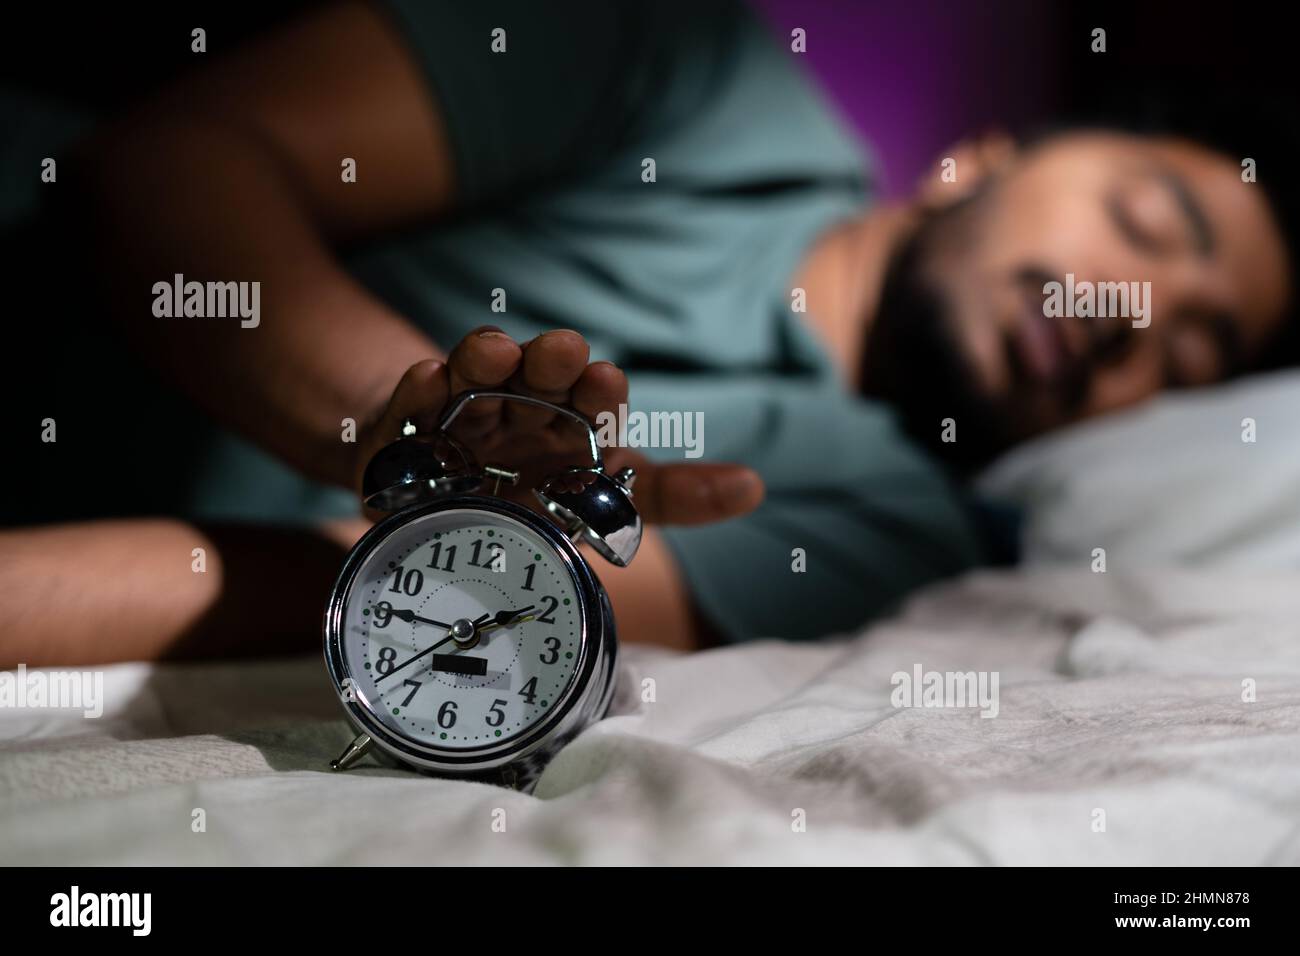 Focus on alarm, young man waking up early morning by turning off alarm - concept of active healthy lifestyle and morning routine. Stock Photo